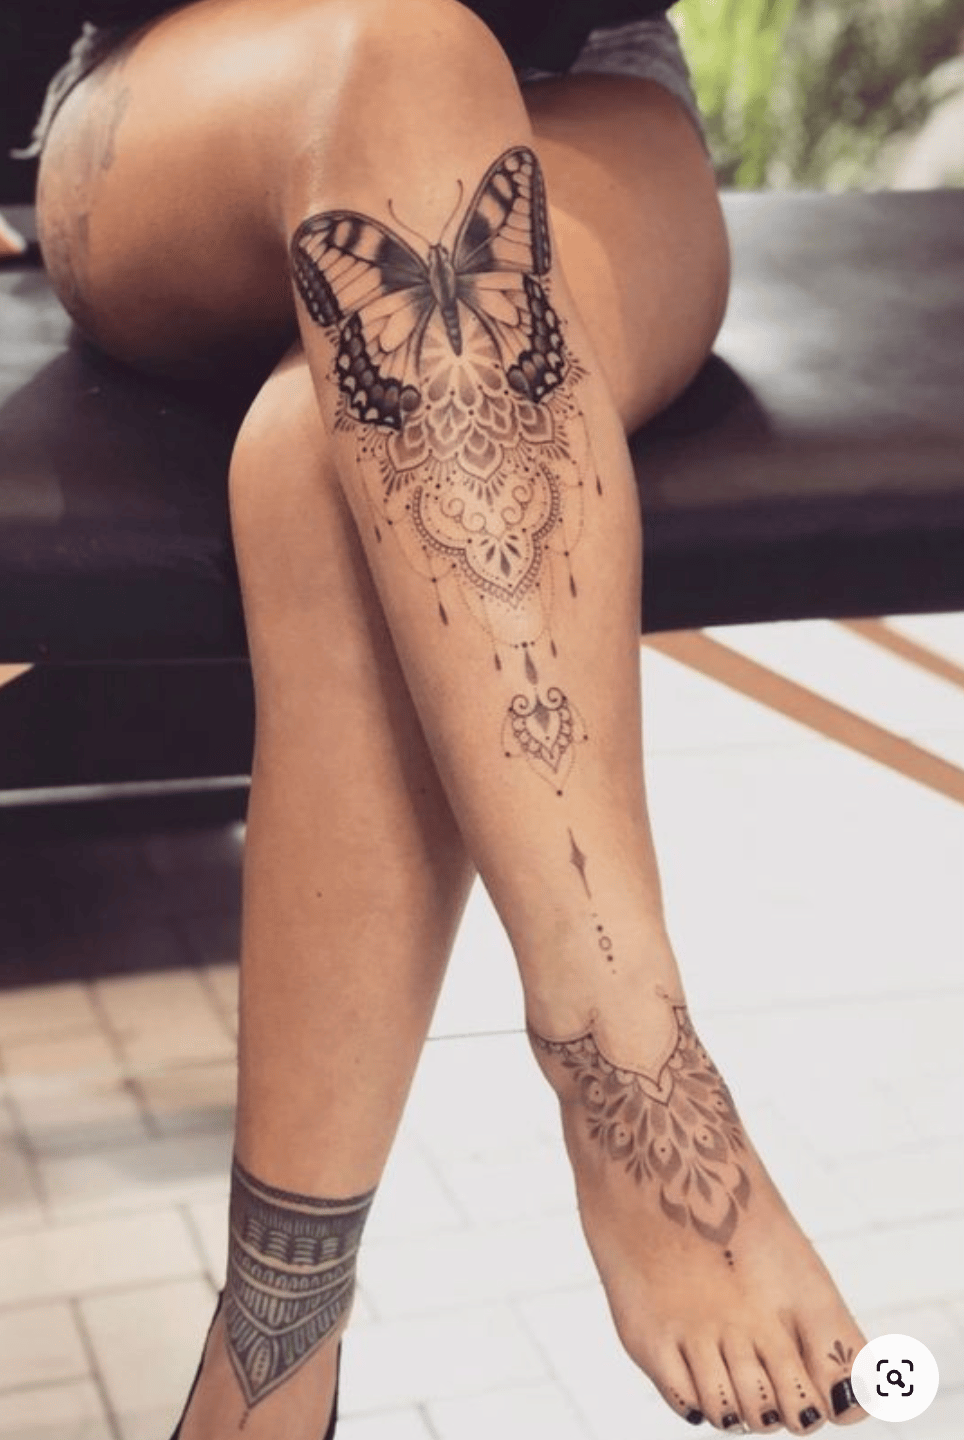 15 Tattoo ideas for legs that are classy and cool - Beanstalk Mums